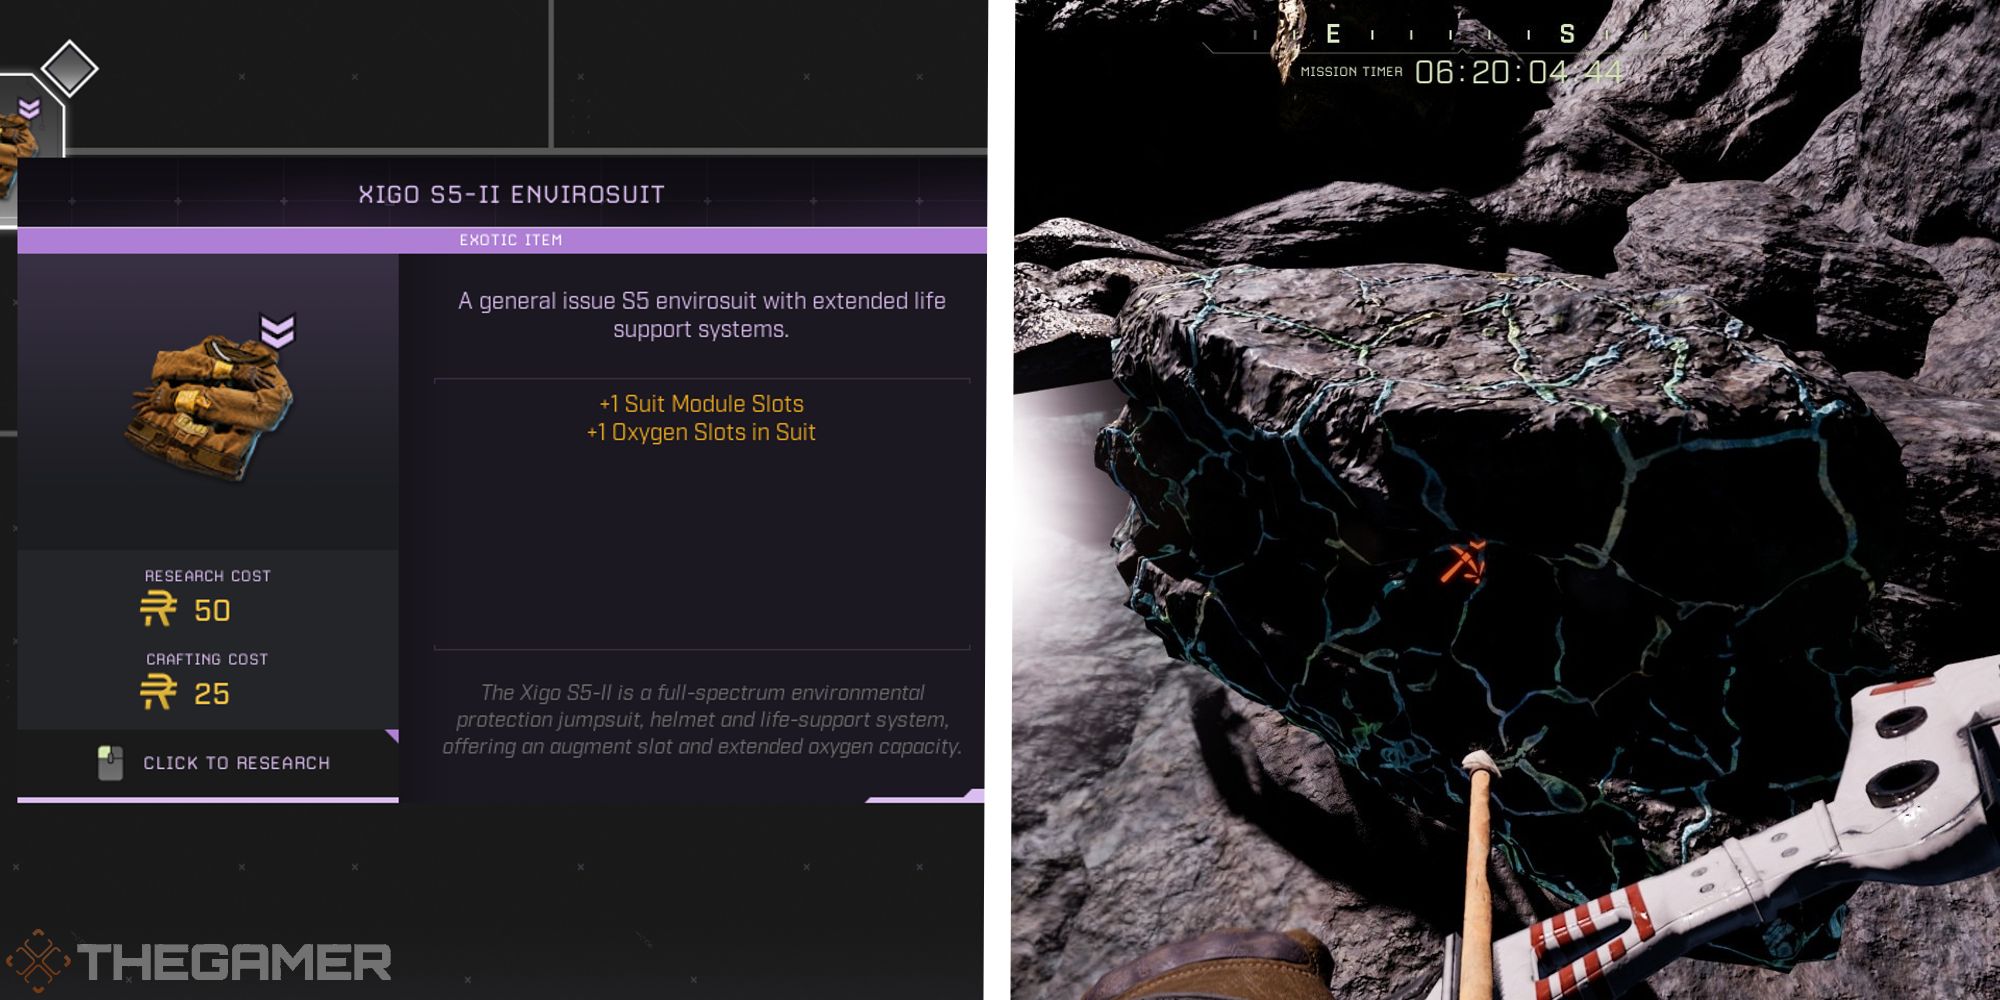 image of envirosuit next to image of exotic material ore